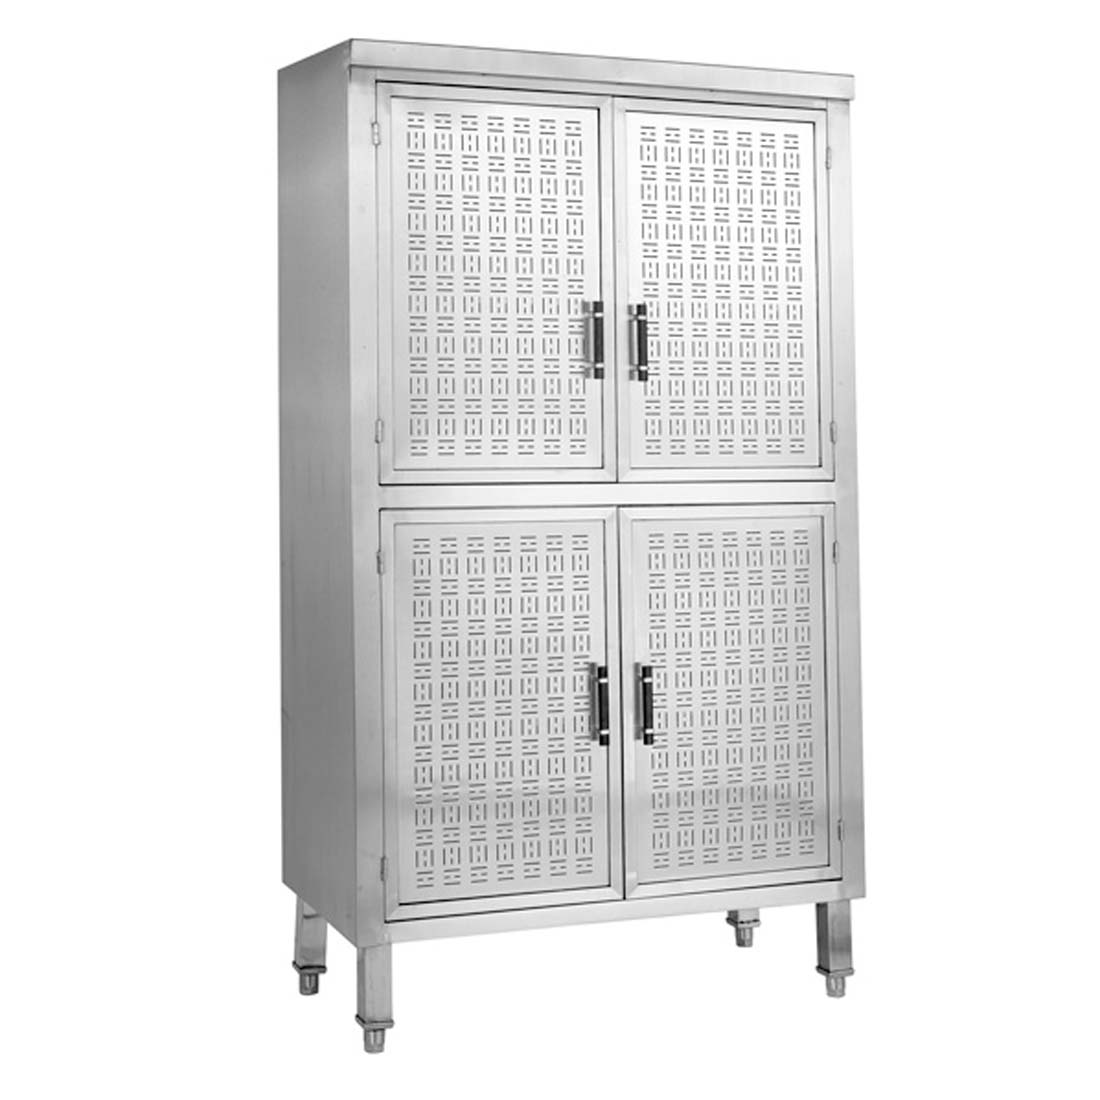 Comchef USC-6-1000 Upright Stainless Steel Storage Cabinet